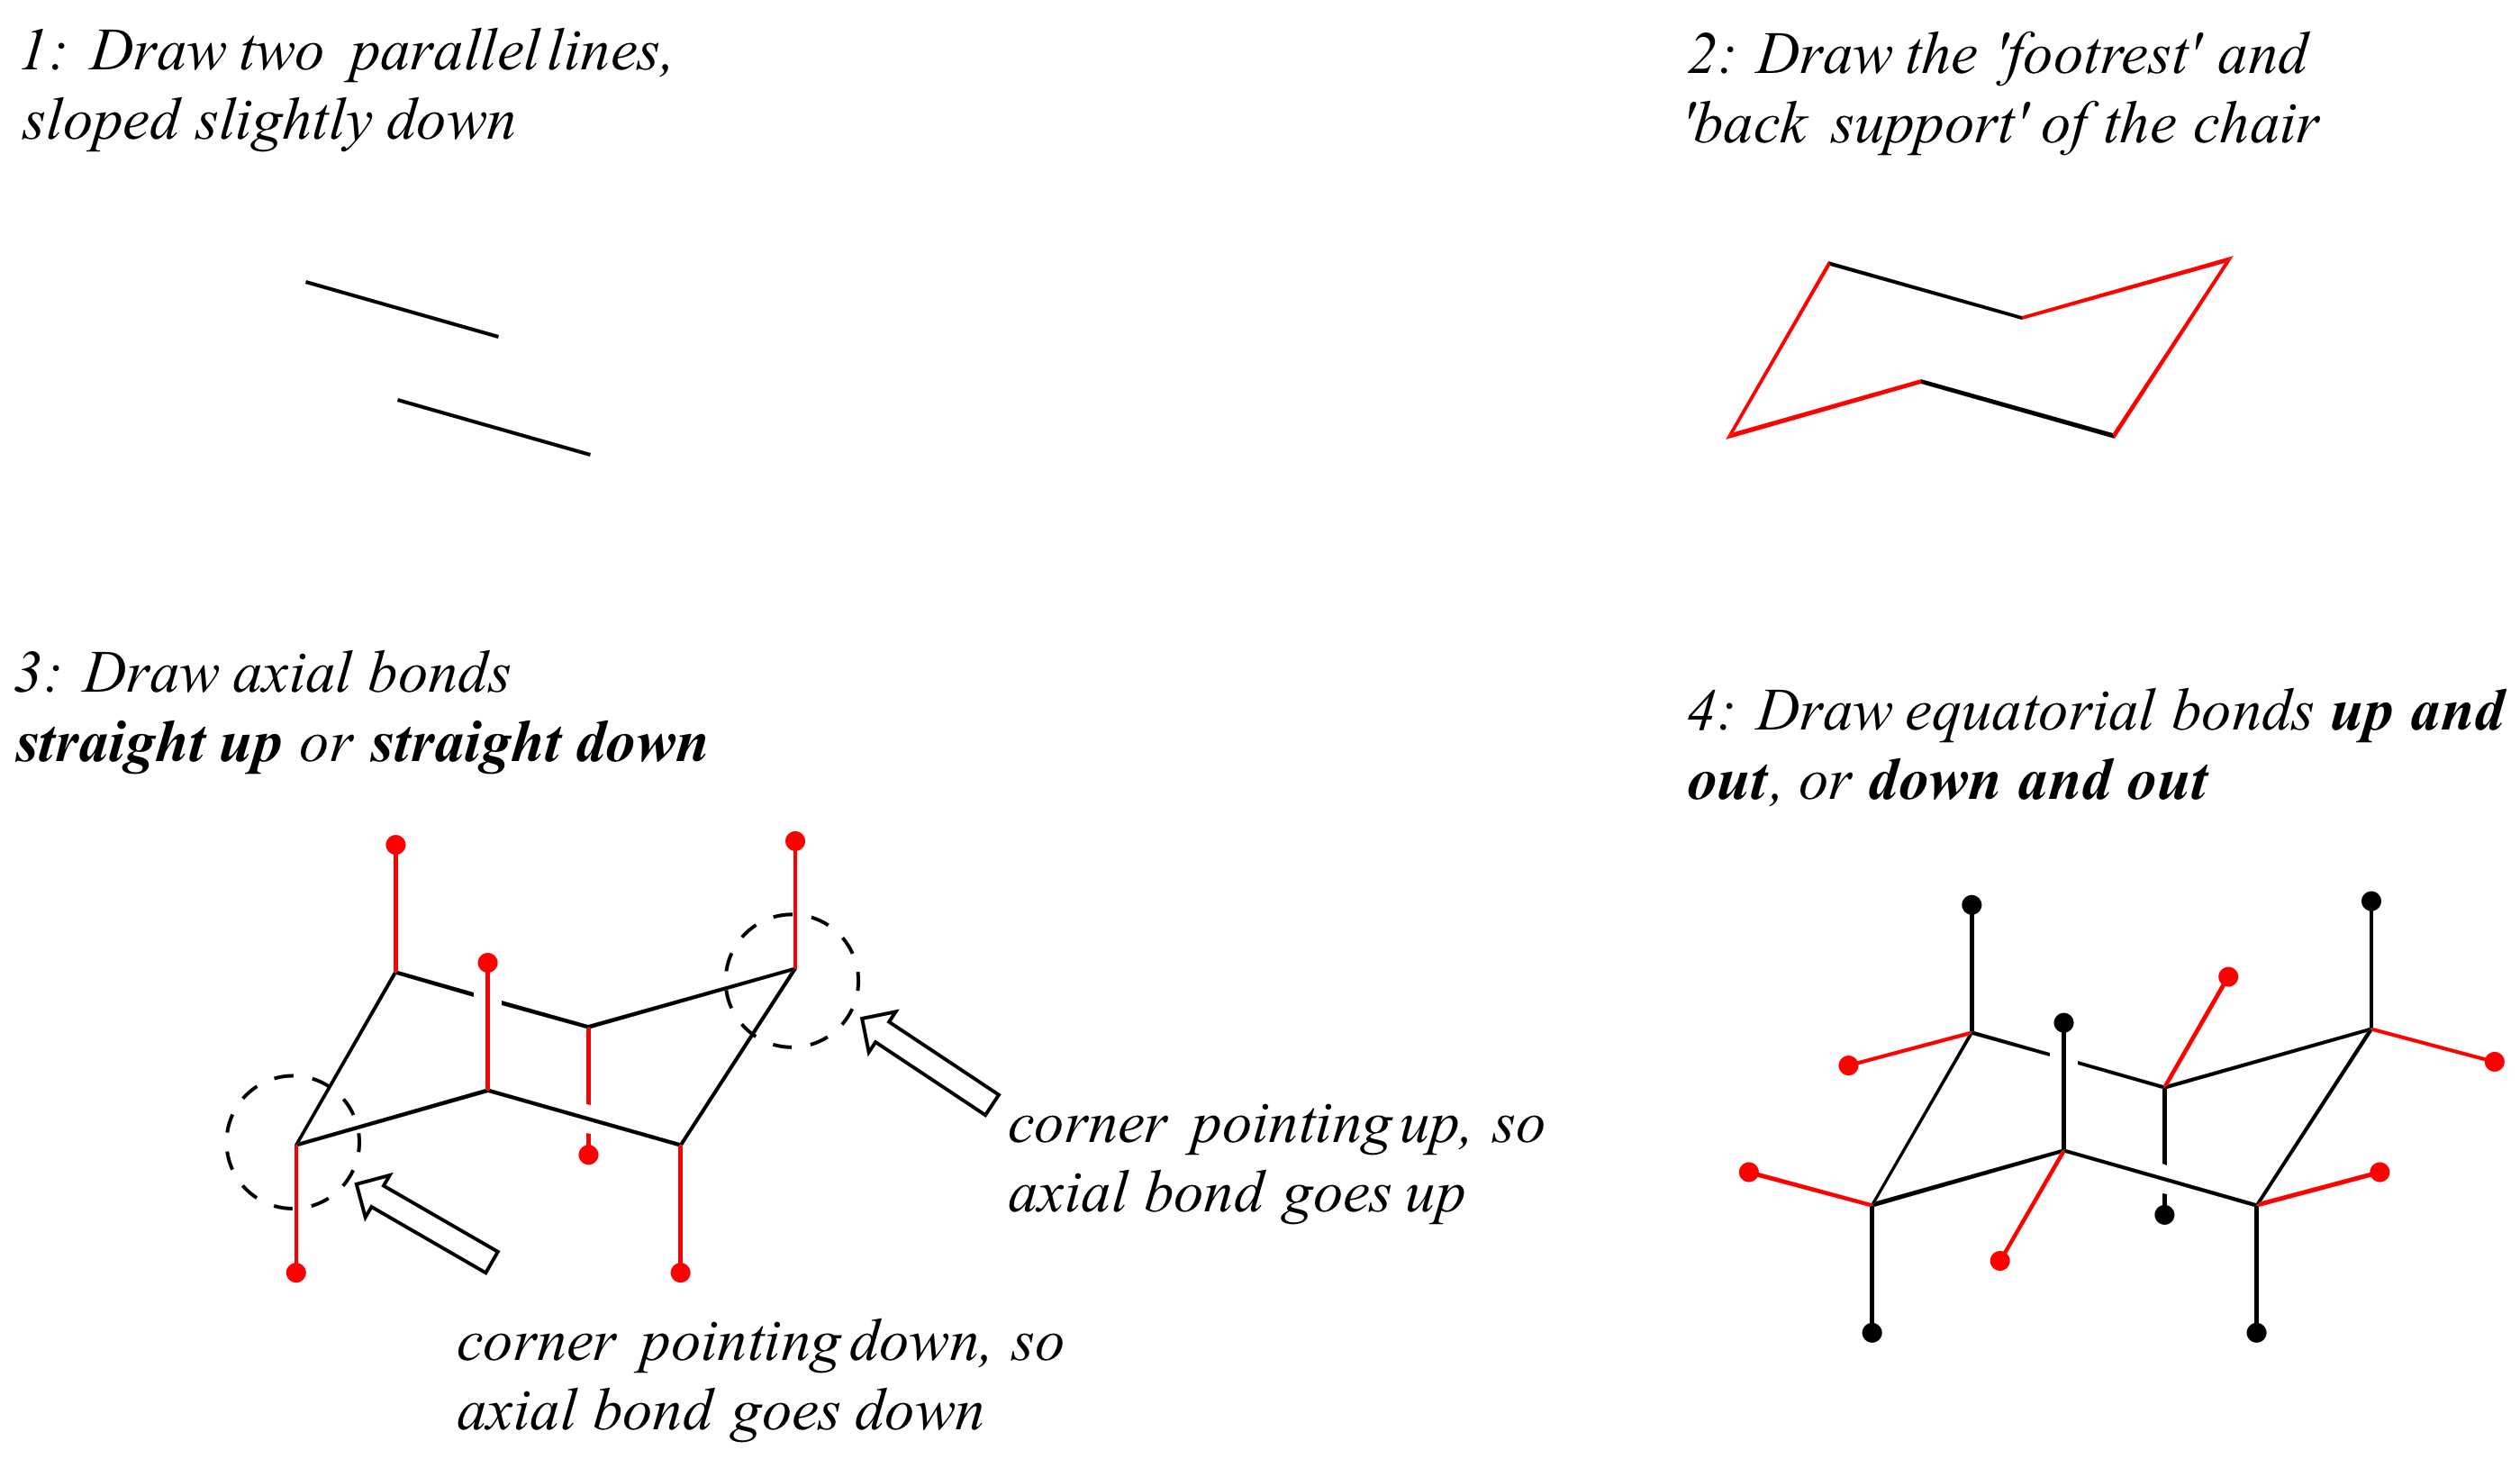 1: Draw two parallel lines, sloped slightly down. 2: Draw the 'footrest' and 'back support' of the chair. 3: Draw axial bonds straight up or straight down. Axial bond goes up when corner points up and down when corner points down. 4: Draw equatorial bonds up and out or down and out. Down when axial is up and up when axial is down.